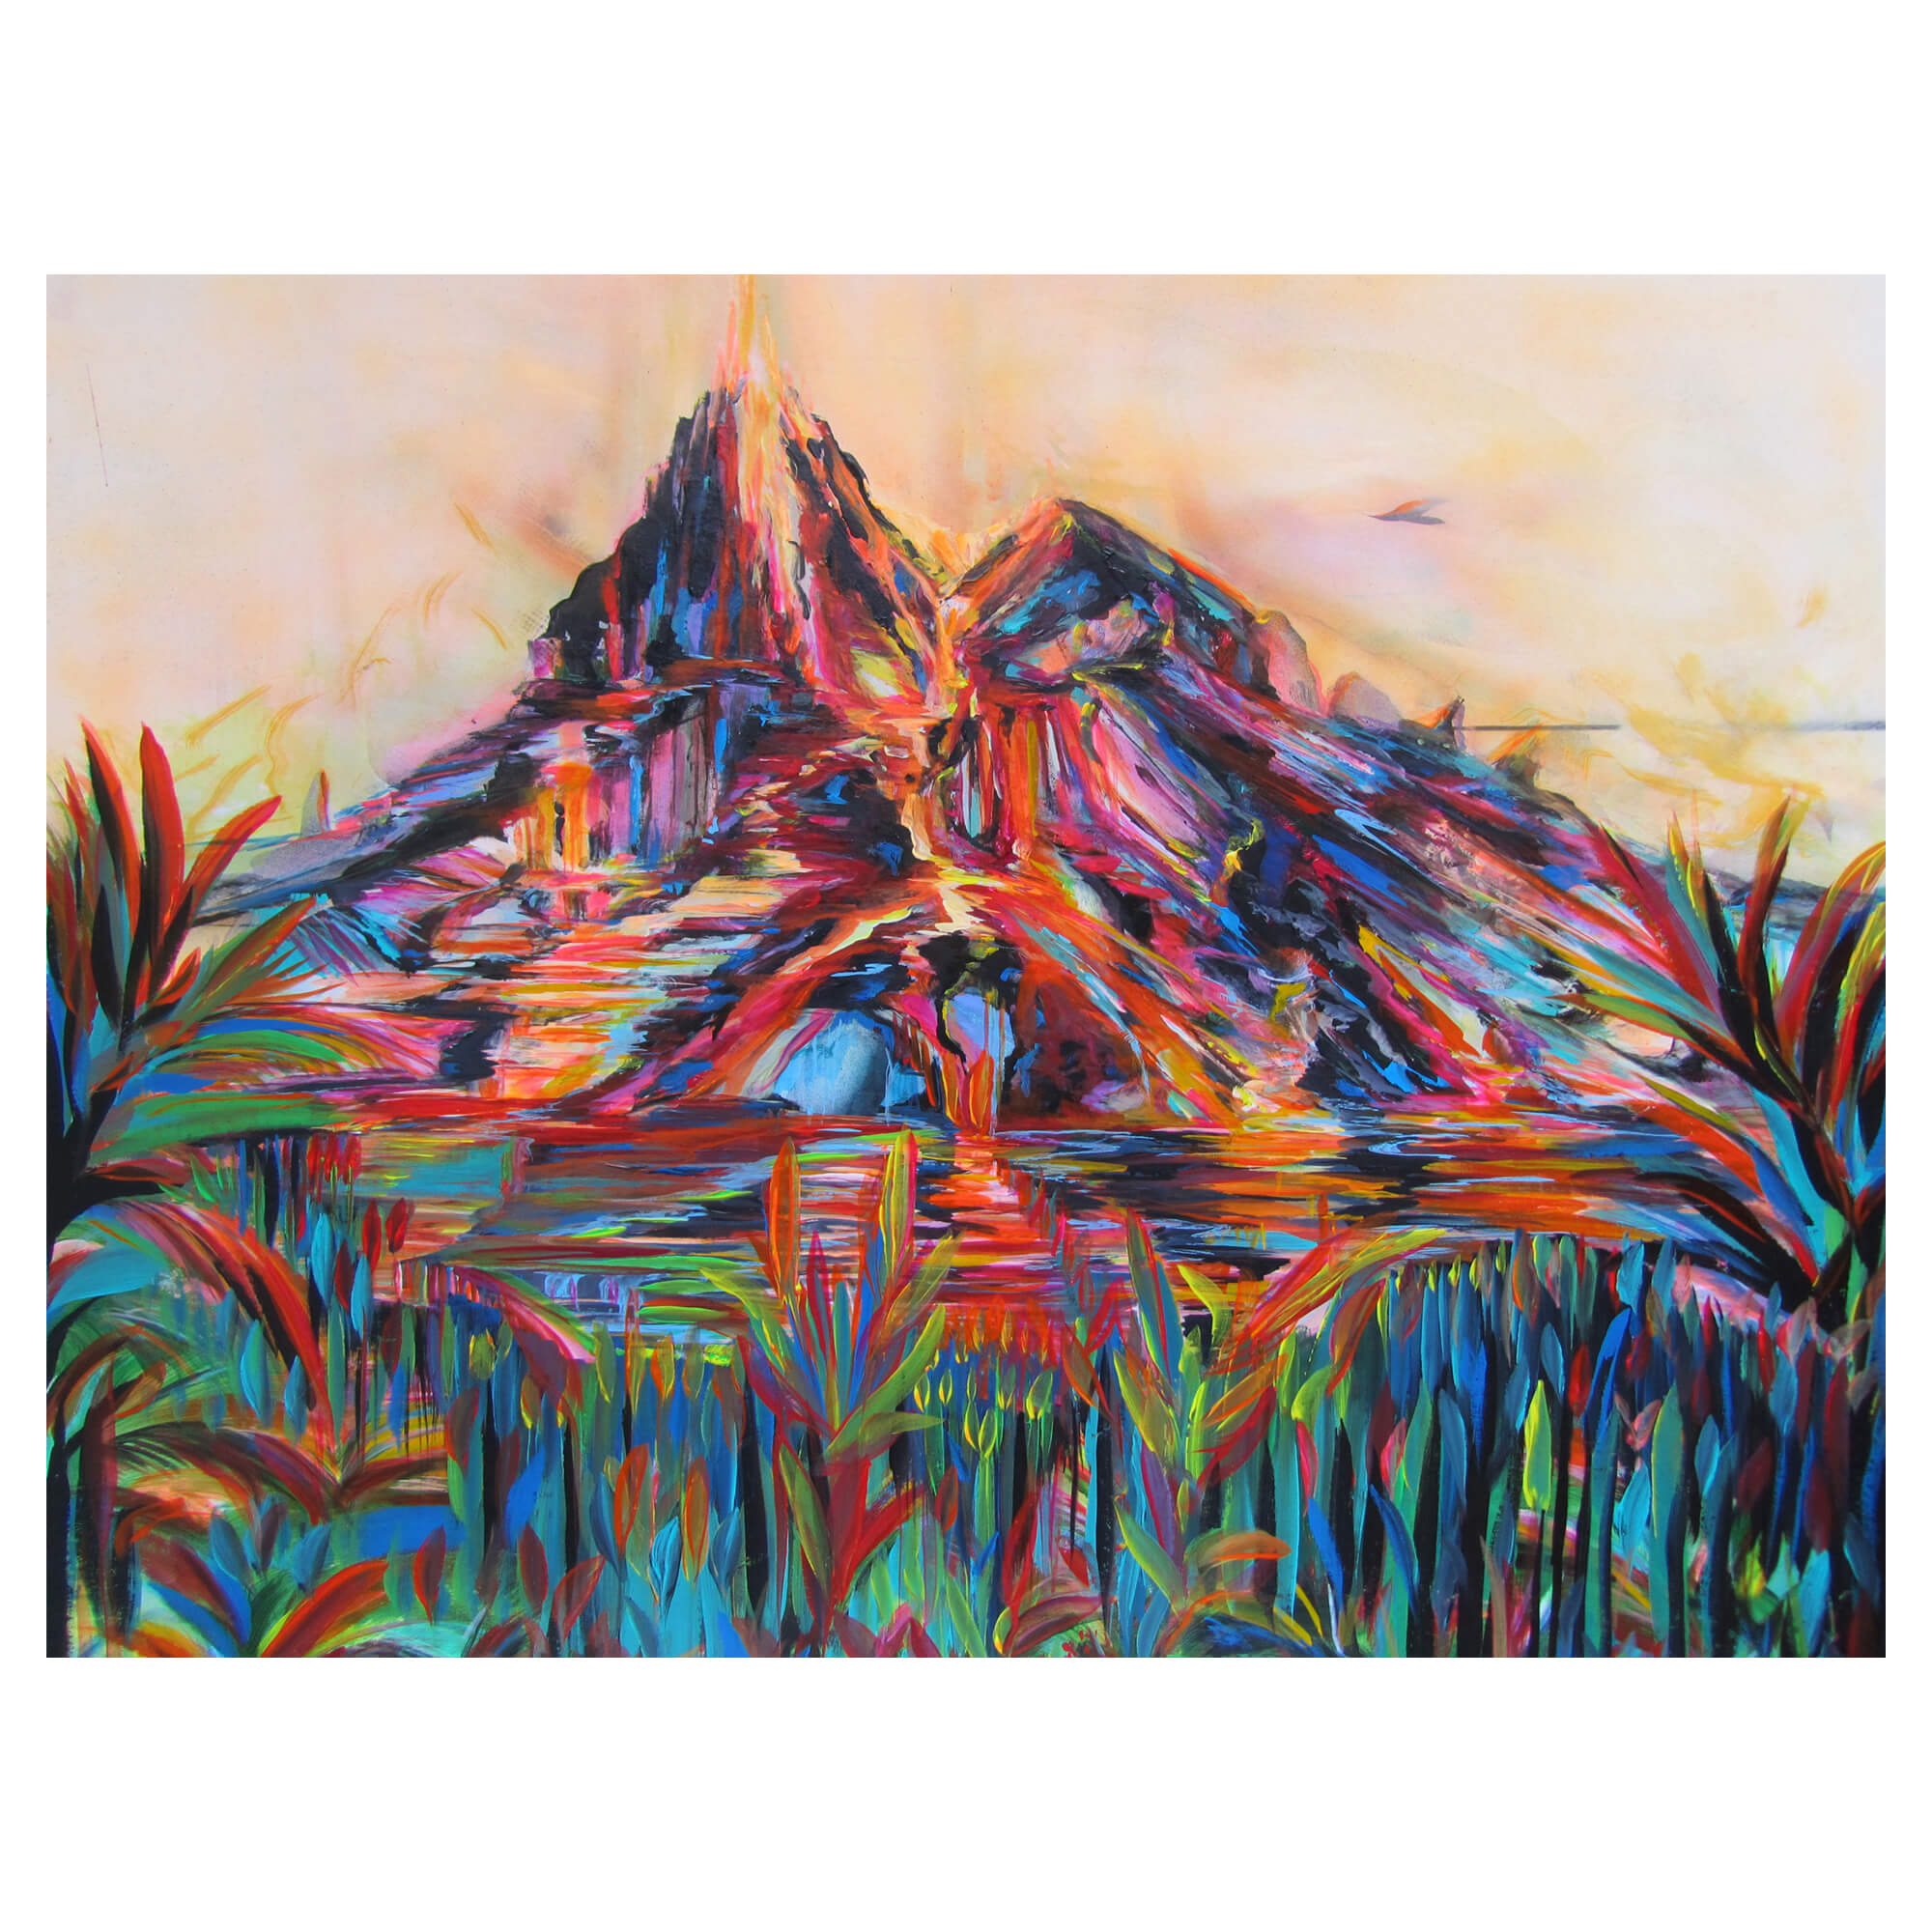 Multi colored volcano with flowing lava by Hawaii artist Jess Burda